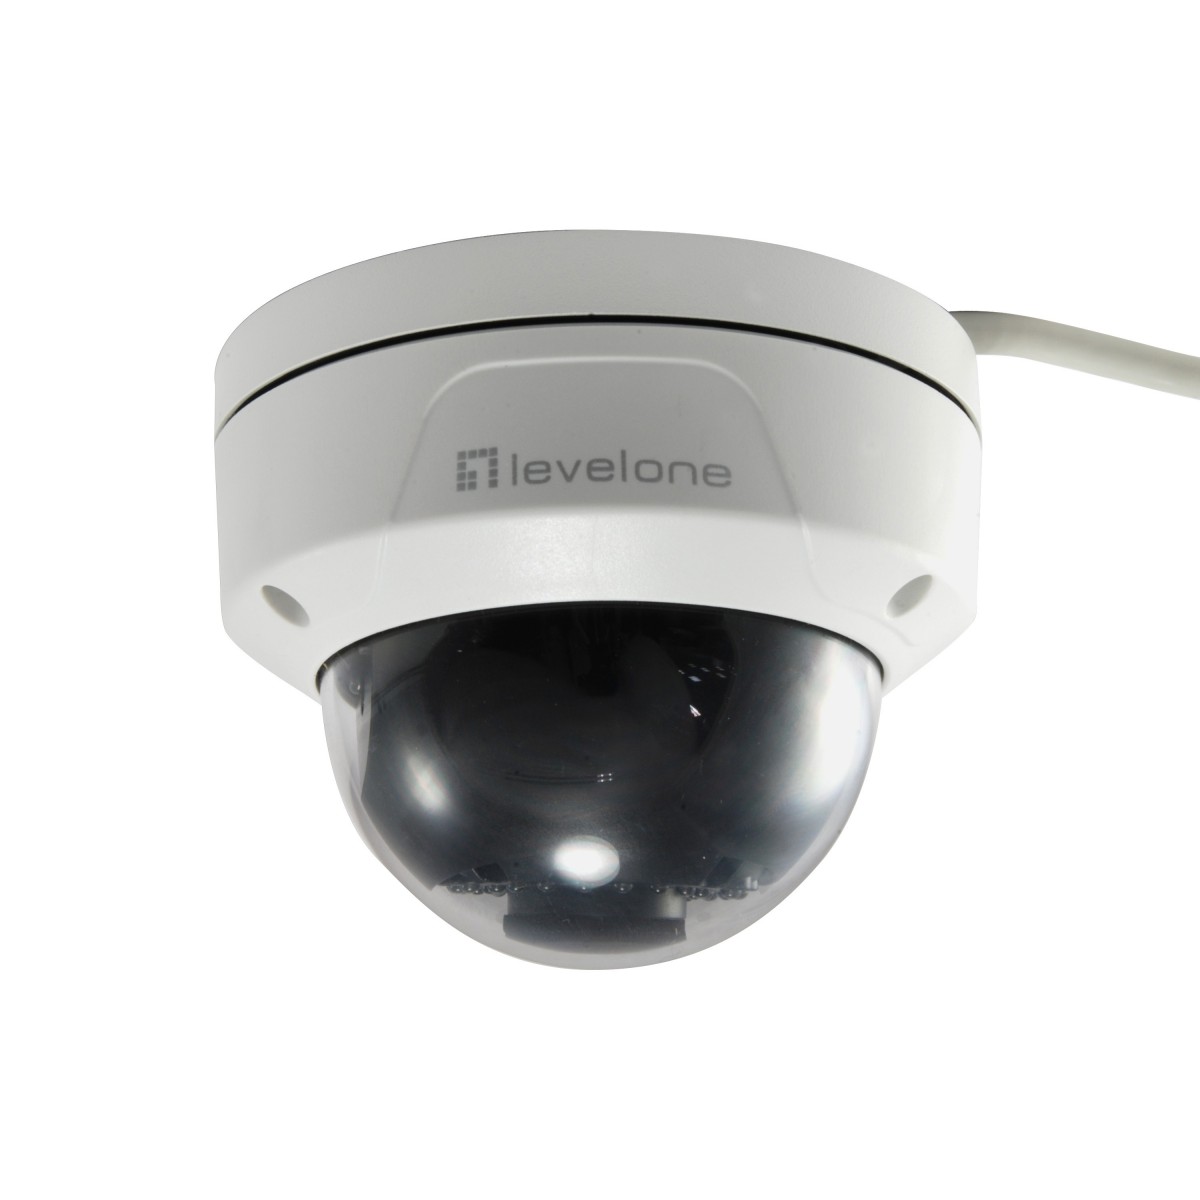 LevelOne FCS-3402 - IP security camera - Indoor & outdoor - Wired - CE - FCC - Dome - Ceiling/wall